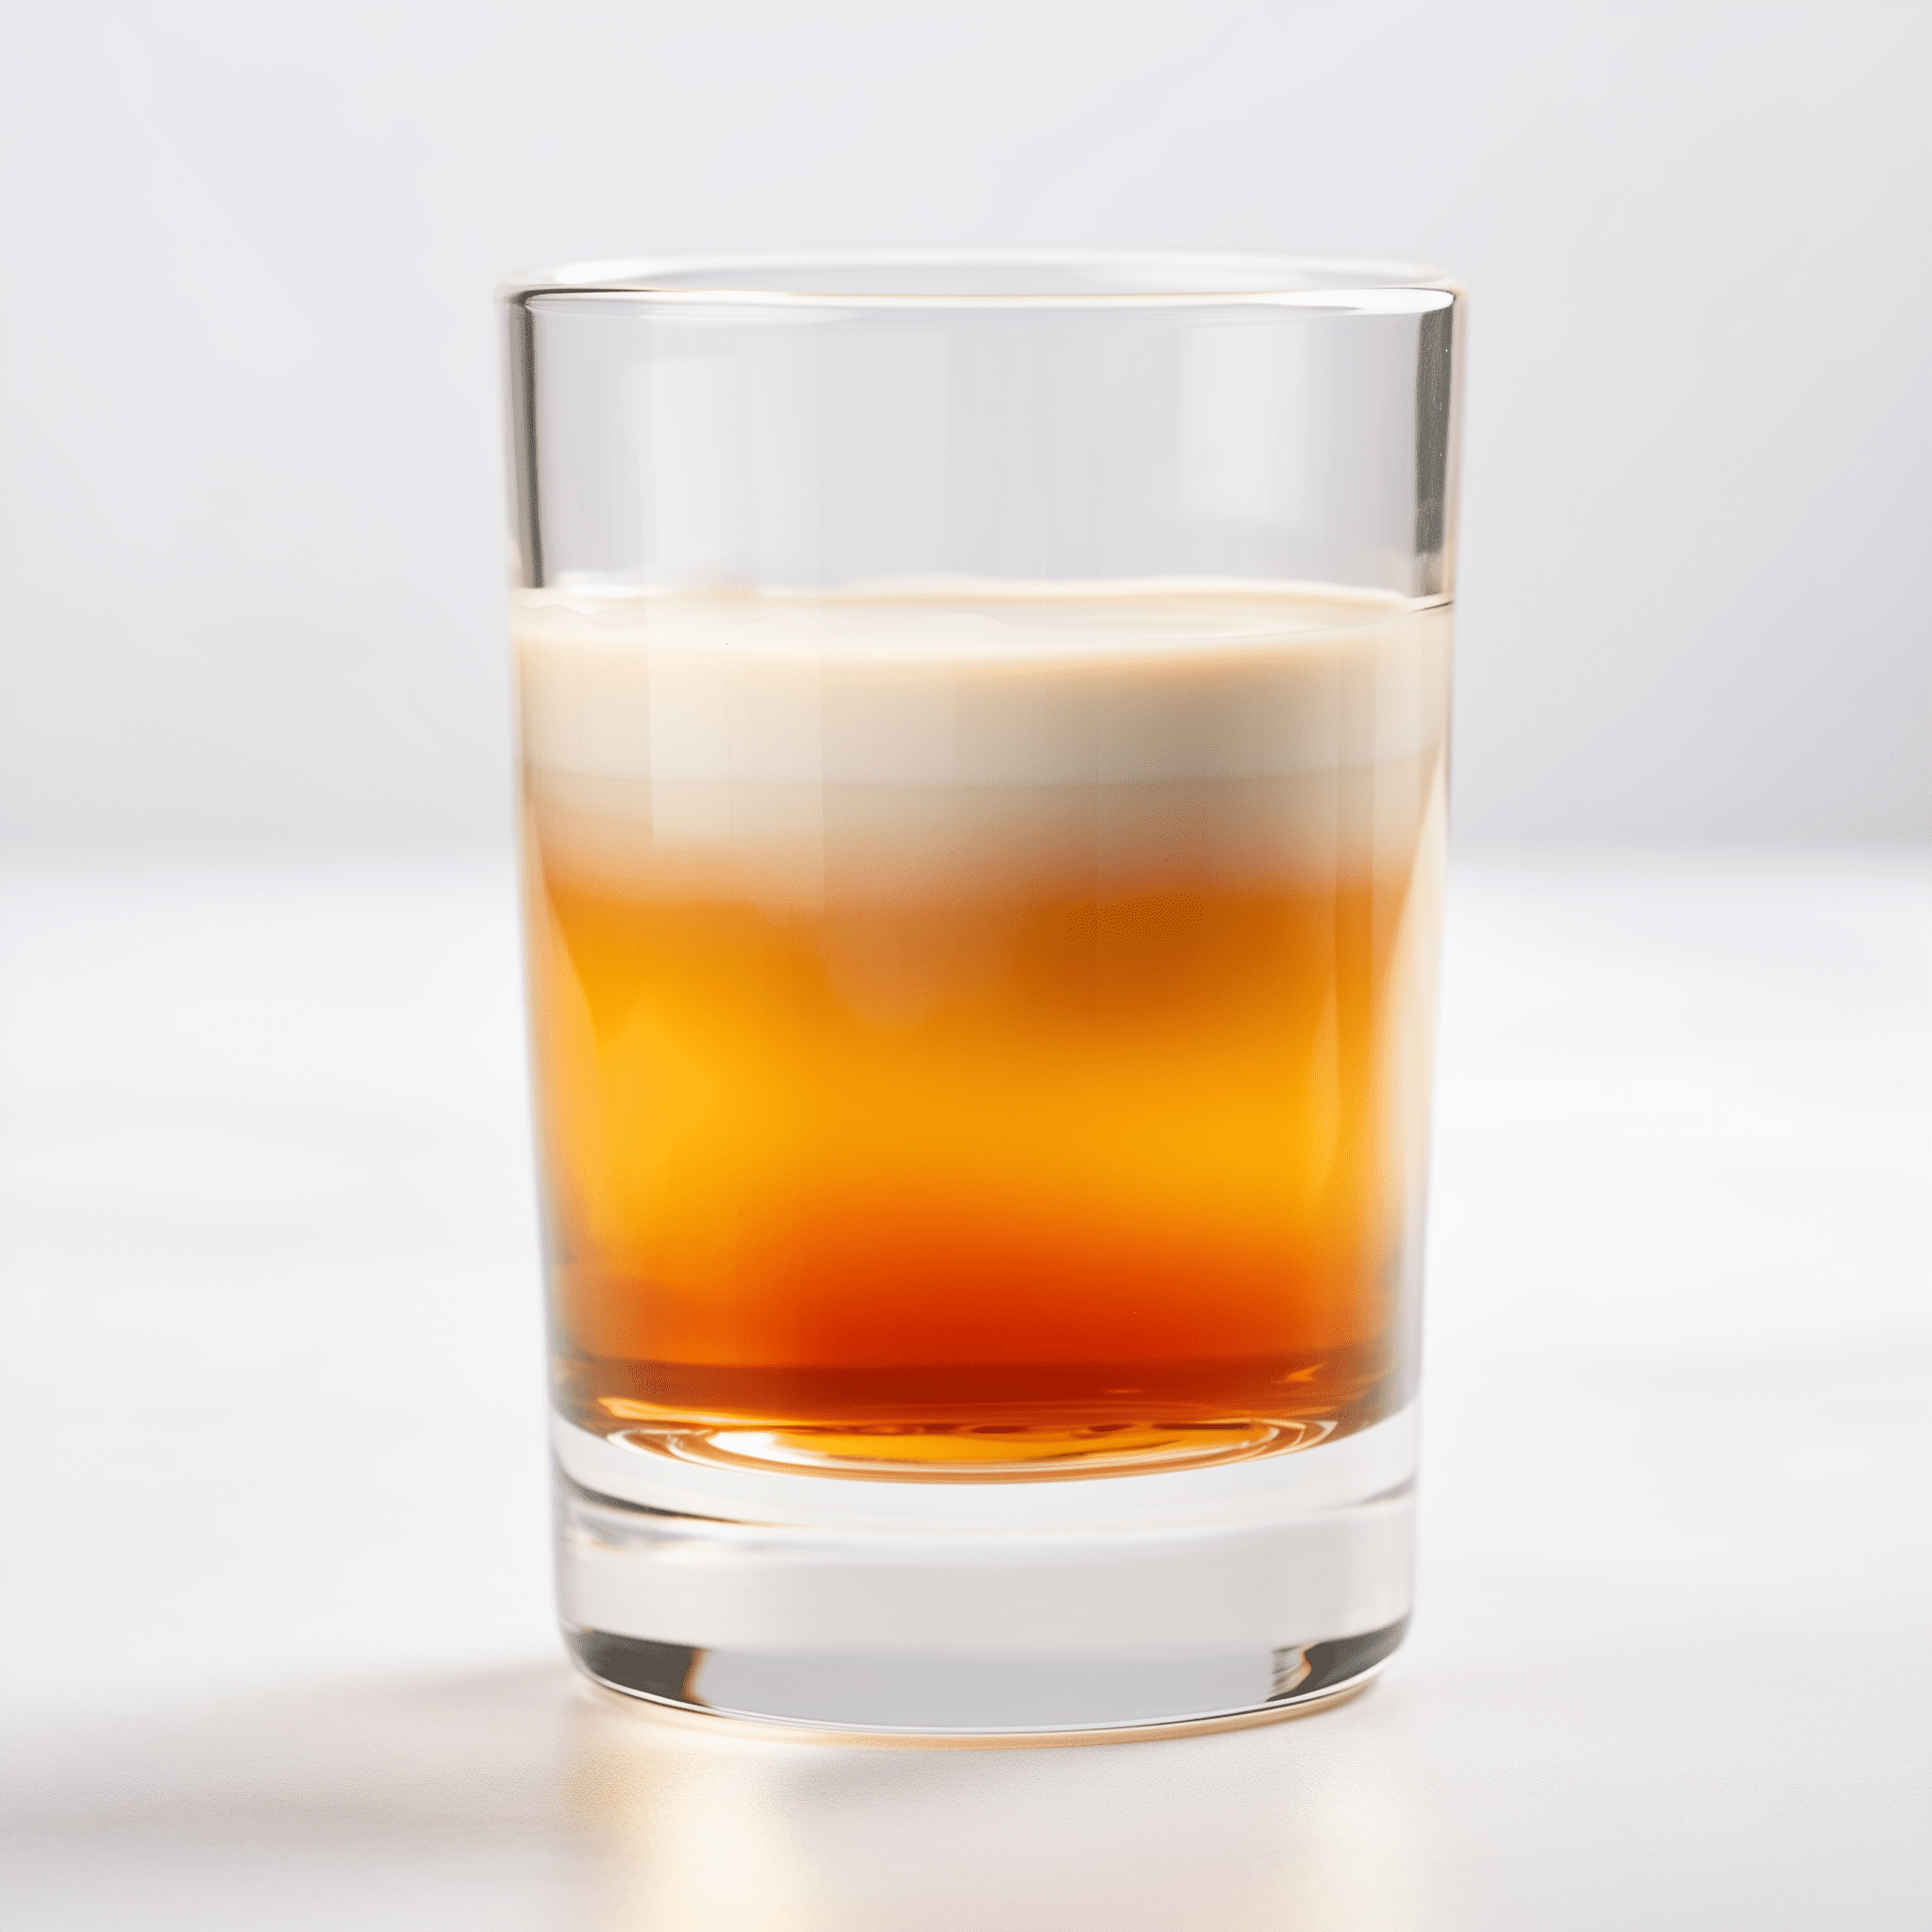 The Buttery Crown offers a rich, velvety texture with a harmonious blend of sweetness and the warming bite of whisky. The butterscotch provides a buttery, caramel flavor that is both comforting and indulgent.